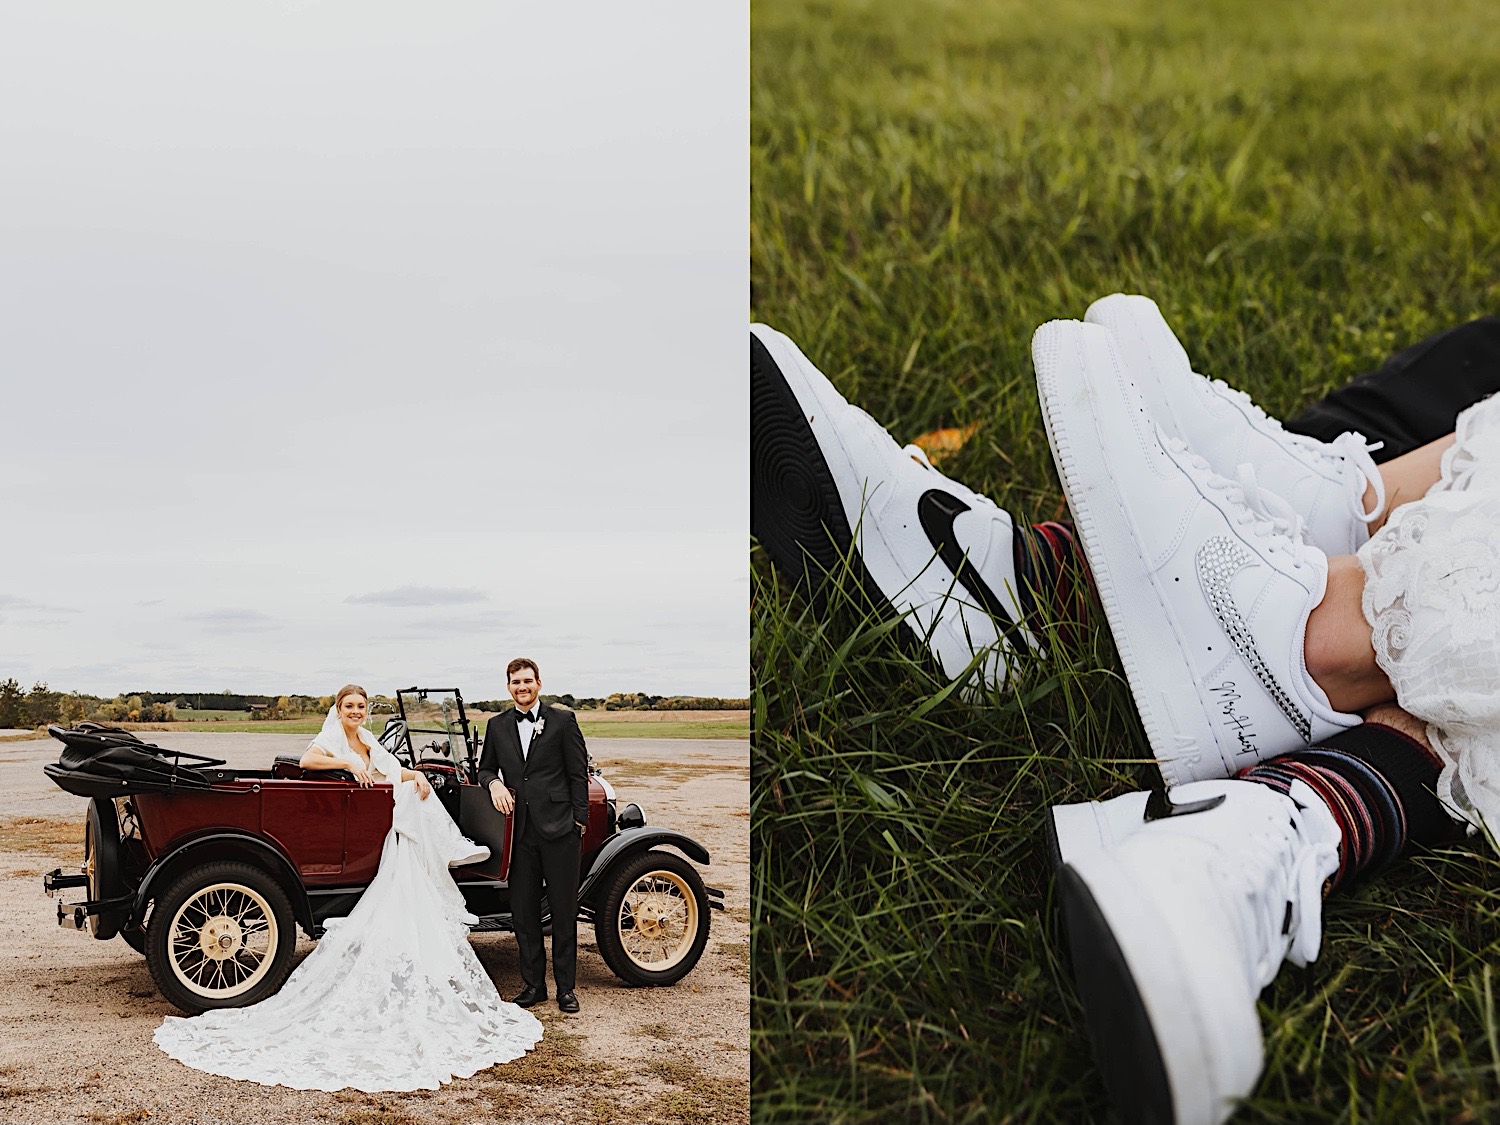 2 photos side by side, the left is of a bride and groom next to a vintage car, the right is a close up photo of a bride and groom wearing casual sneakers